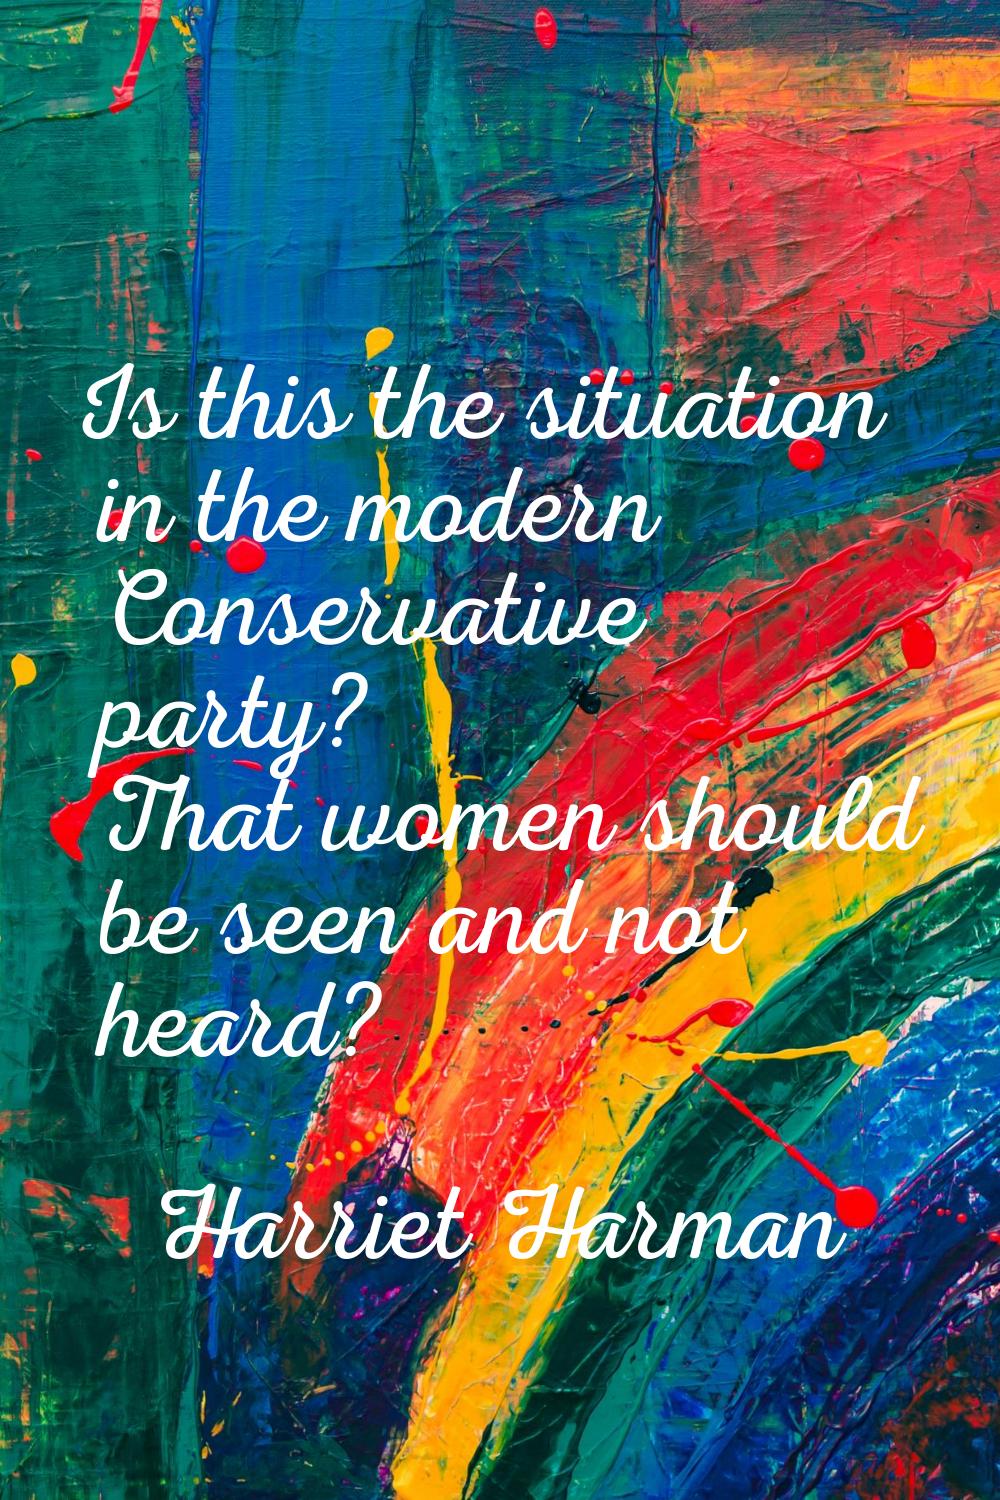 Is this the situation in the modern Conservative party? That women should be seen and not heard?